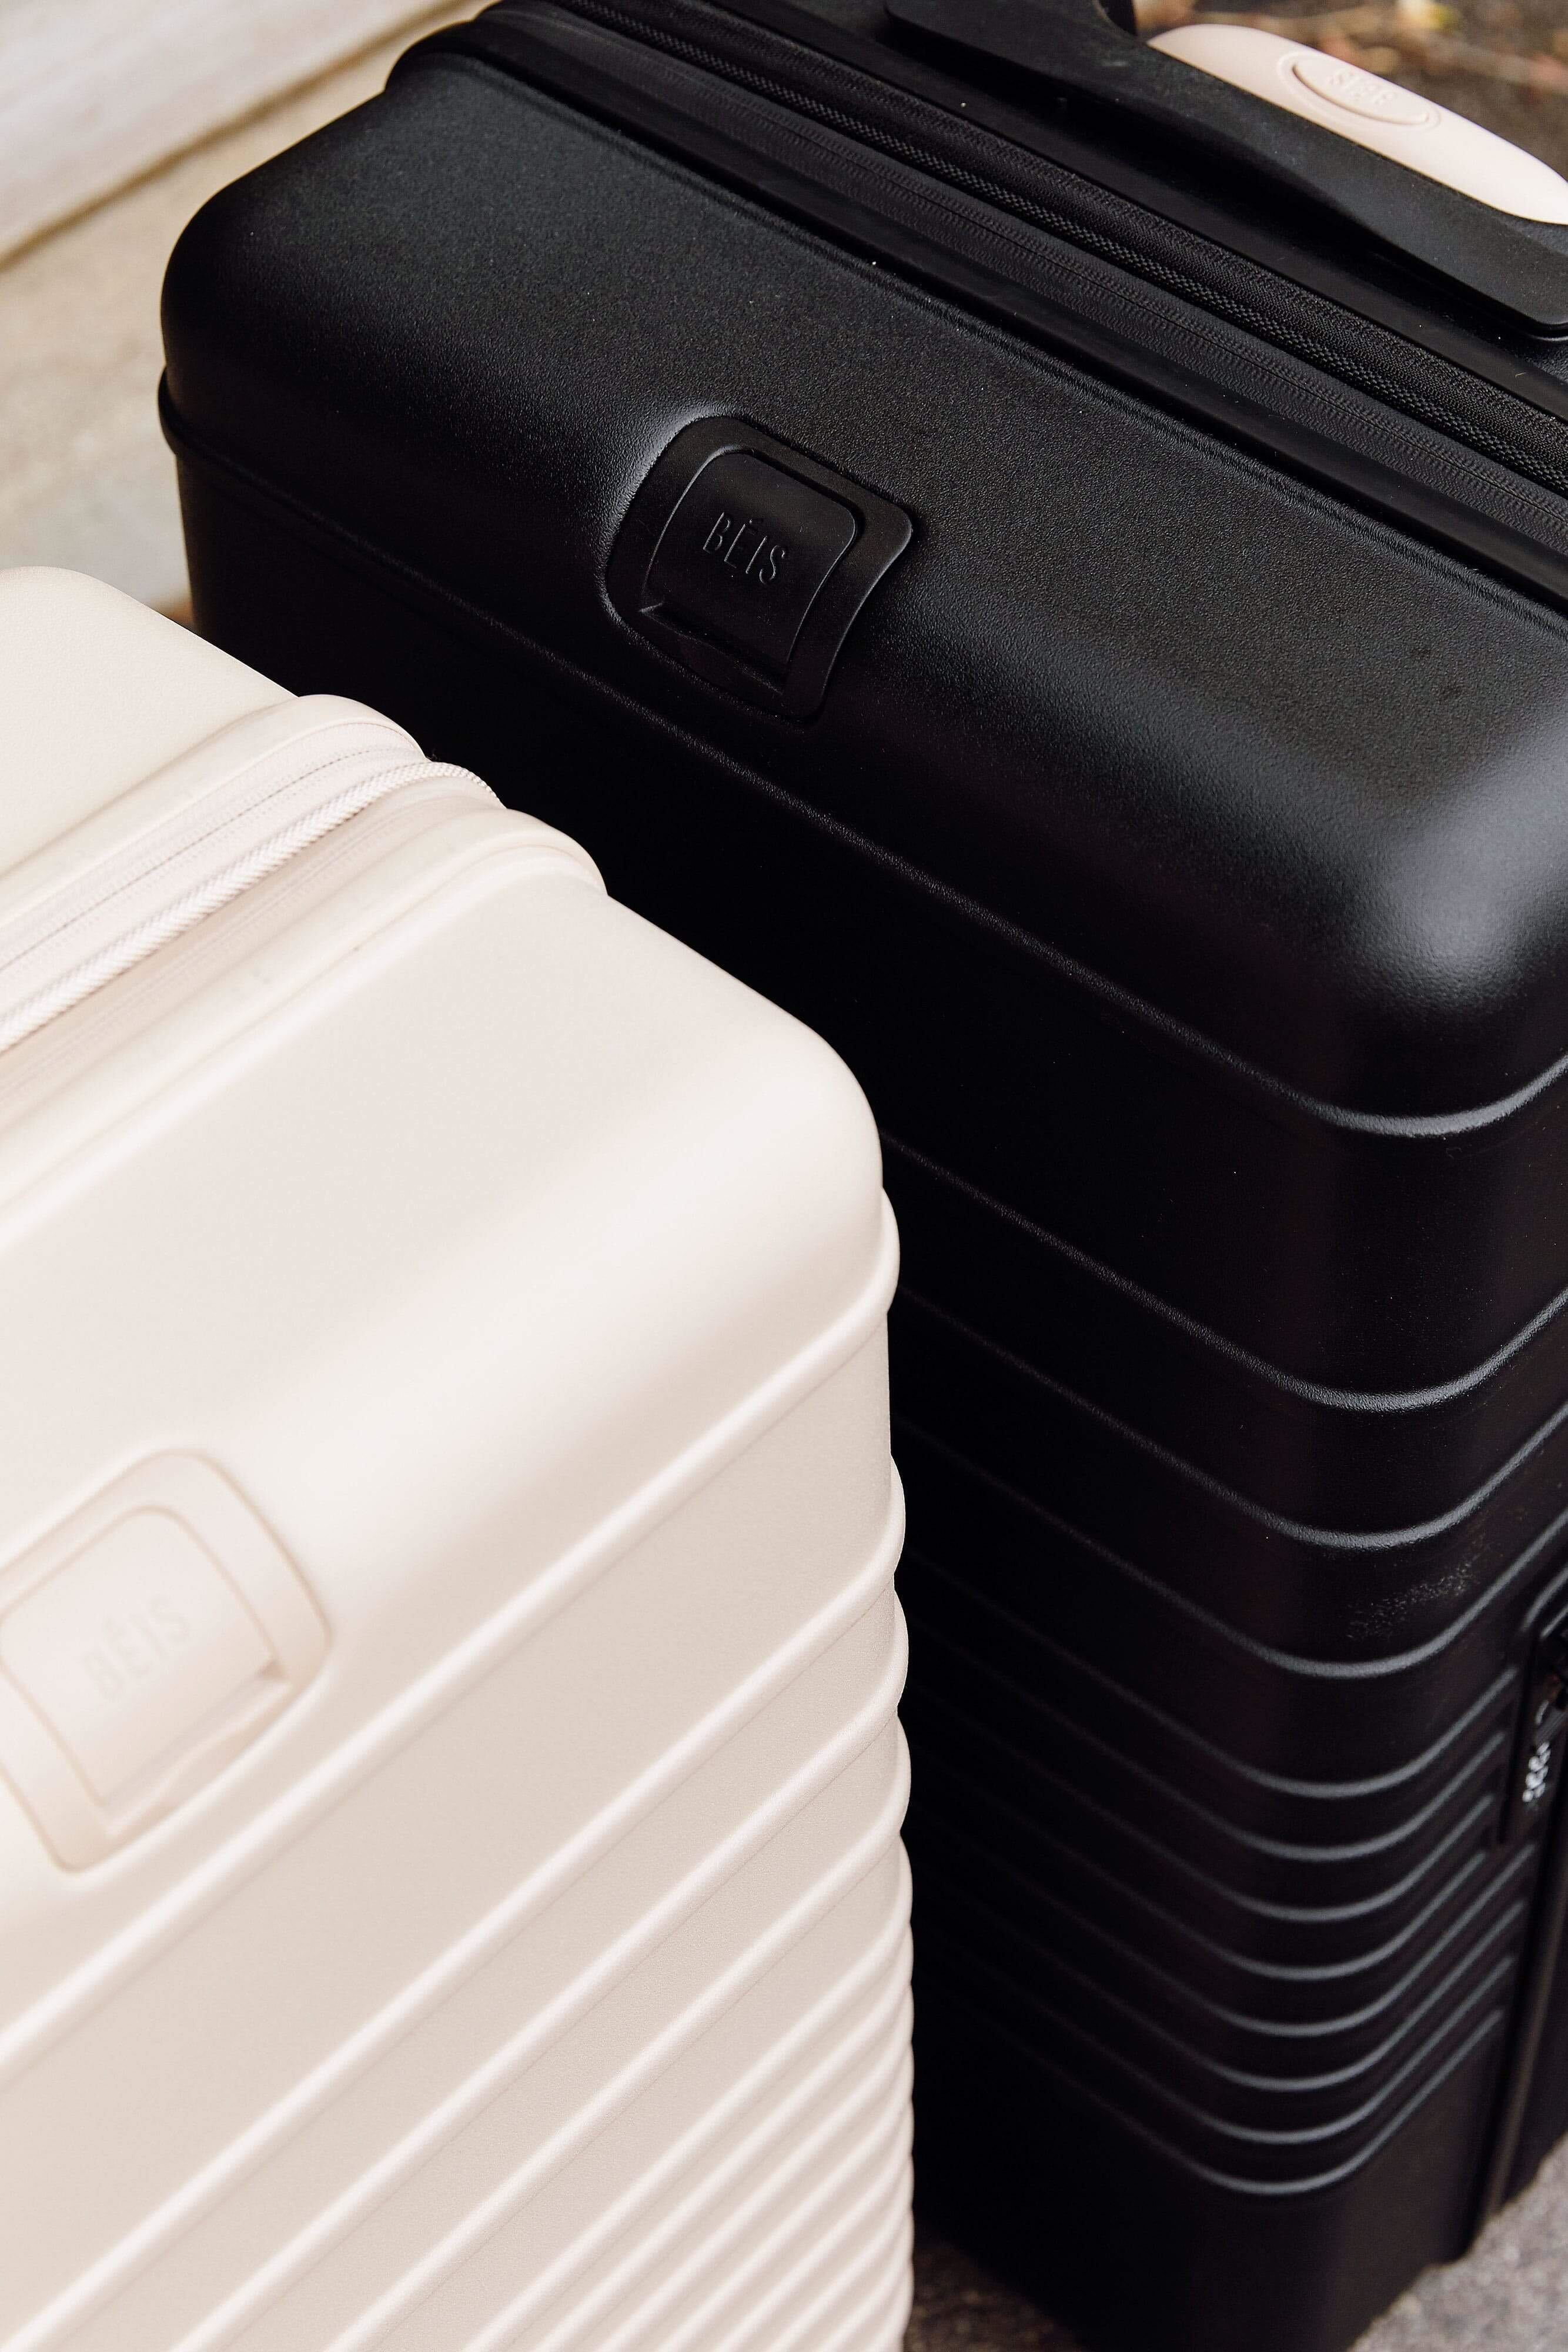 You'll always be able to identify your suitcase with Monos' new